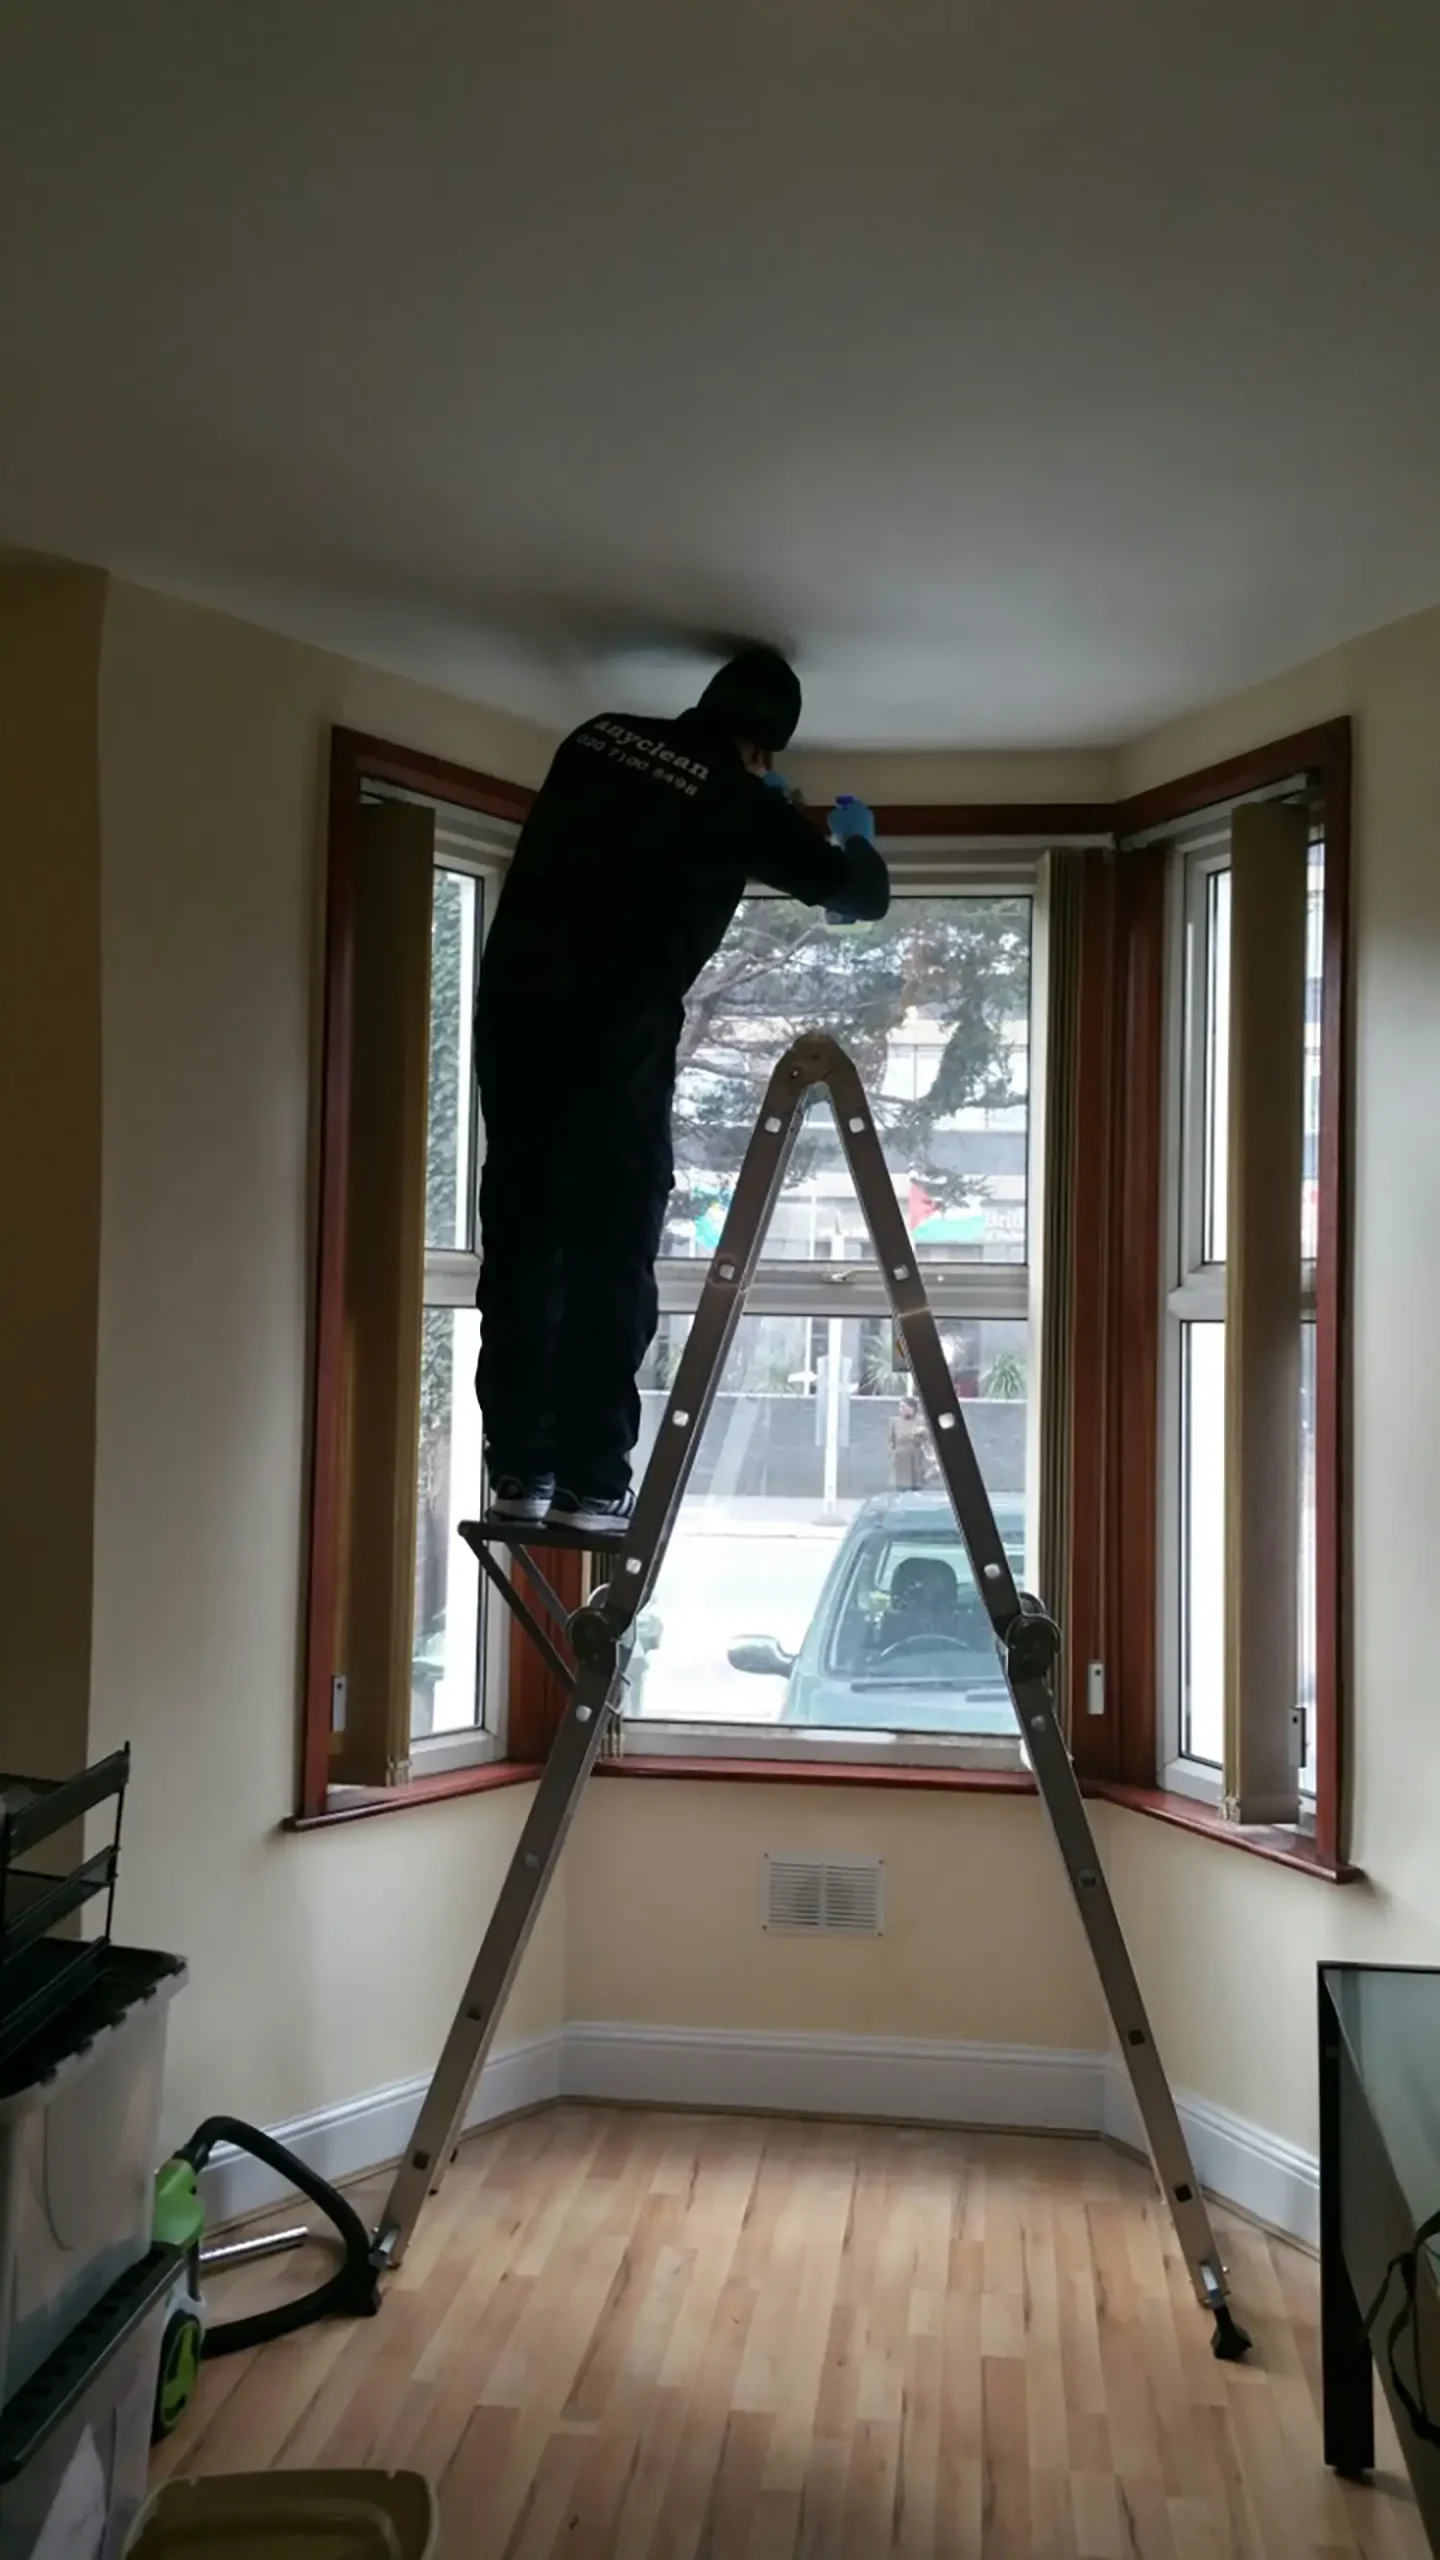 Anyclean Tenancy Technician Cleaning the Top of a Window Using a Ladder